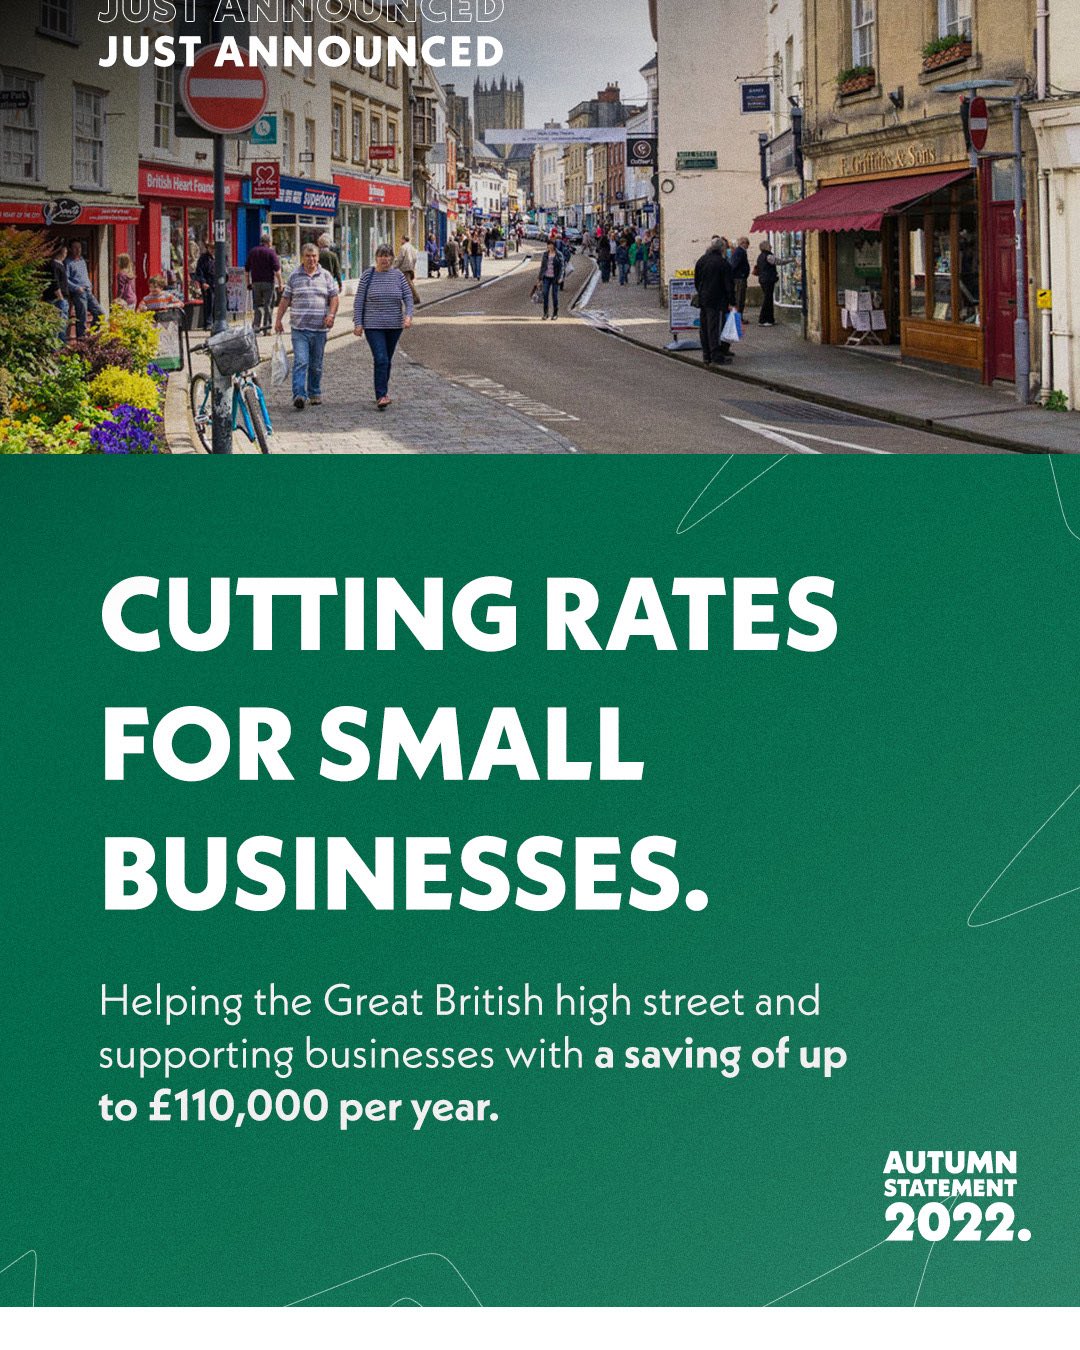 Cutting rates for small businesses